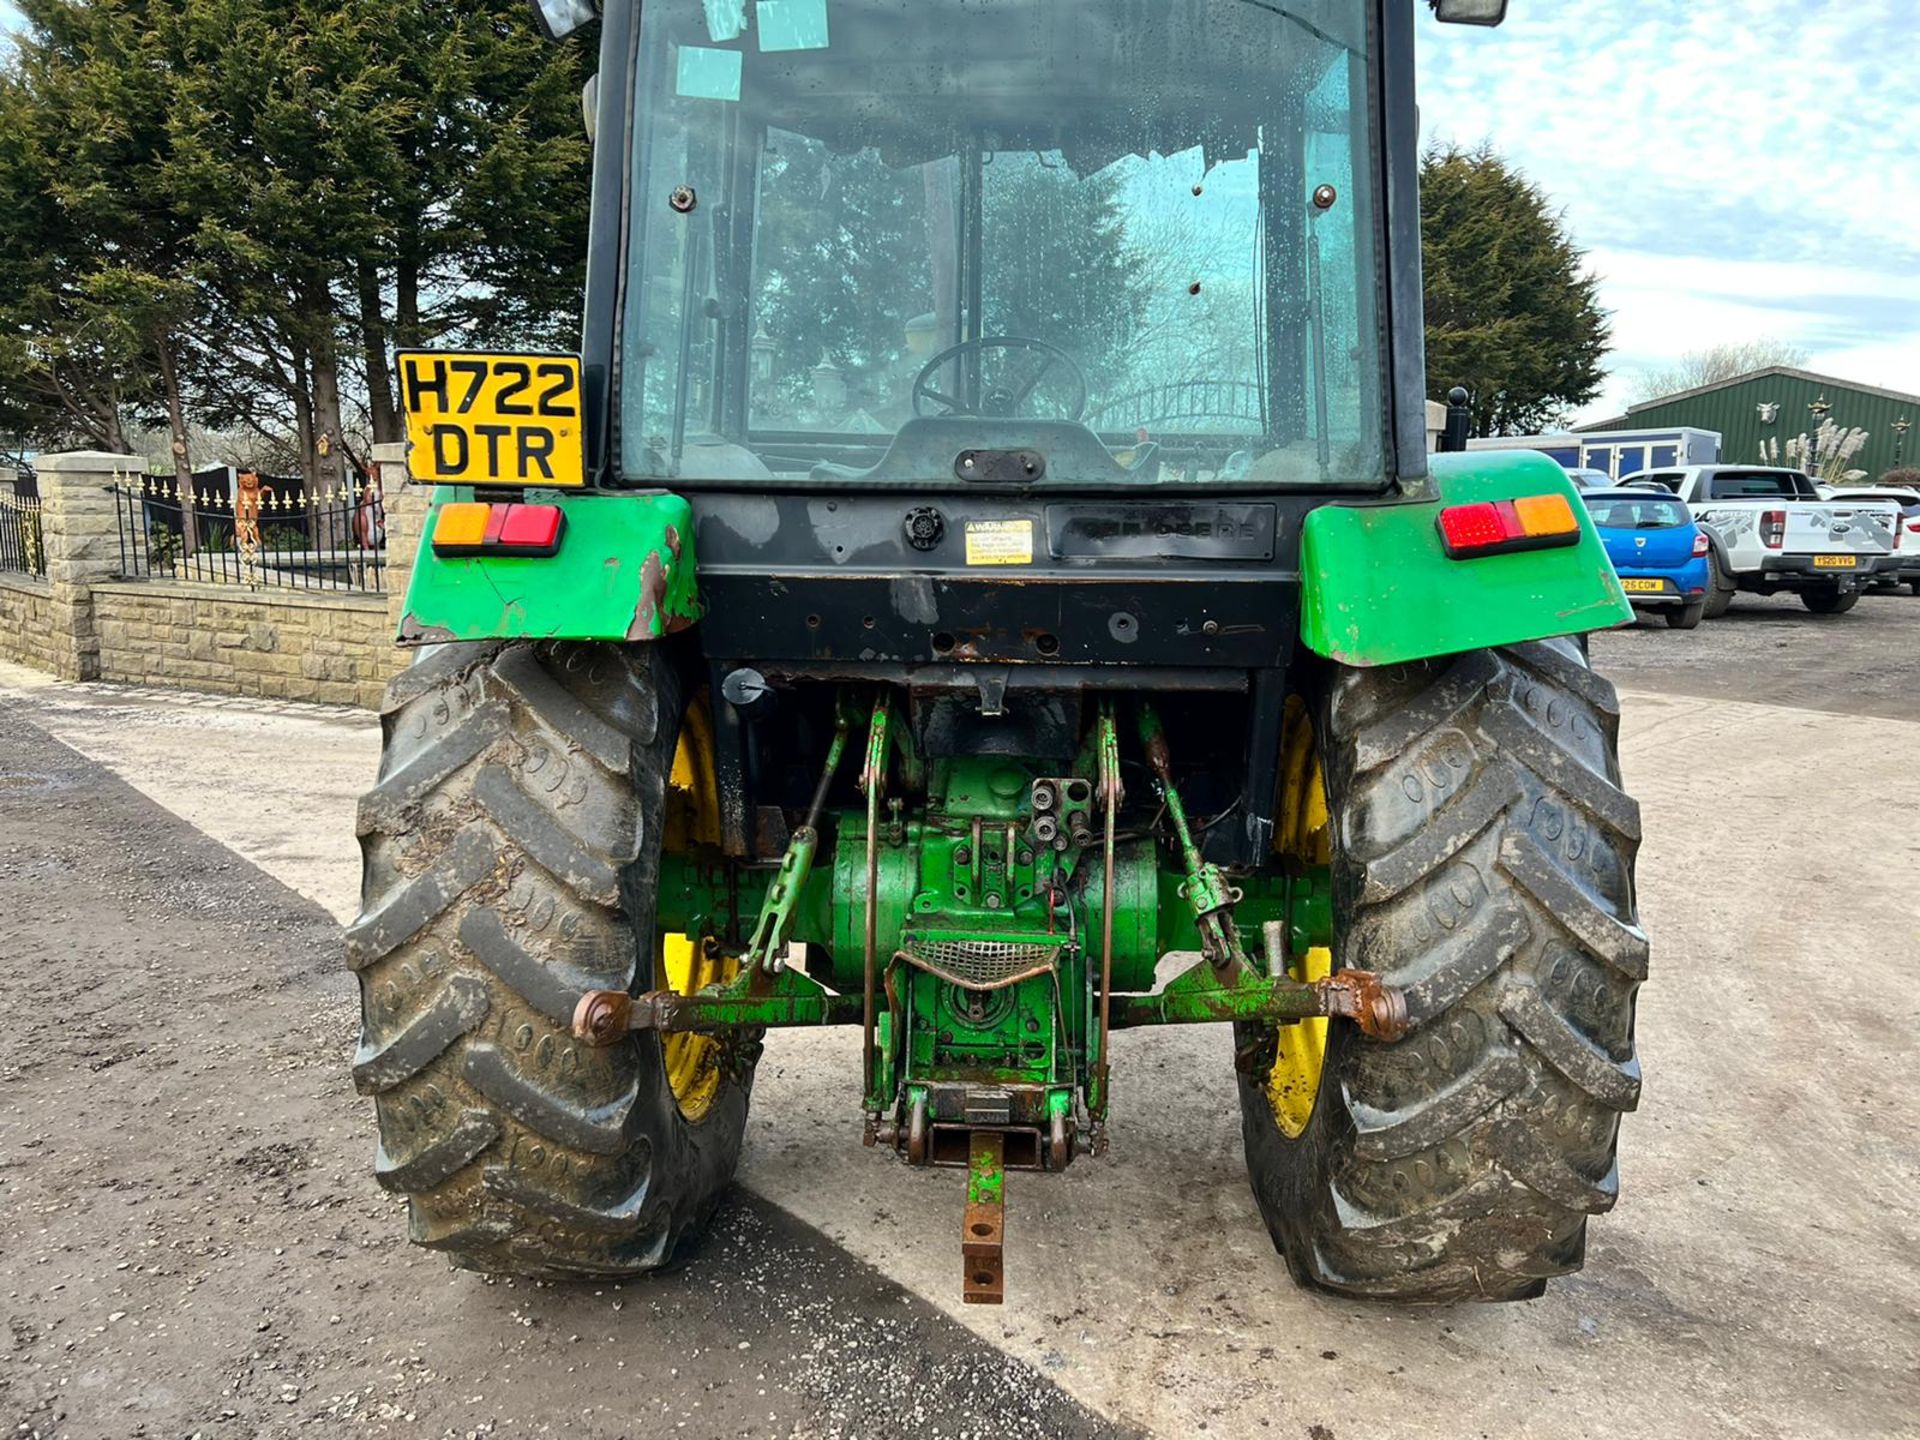 JOHN DEERE 2650 78hp 4WD TRACTOR, RUNS AND DRIVES, ROAD REGISTERED *PLUS VAT* - Image 6 of 15